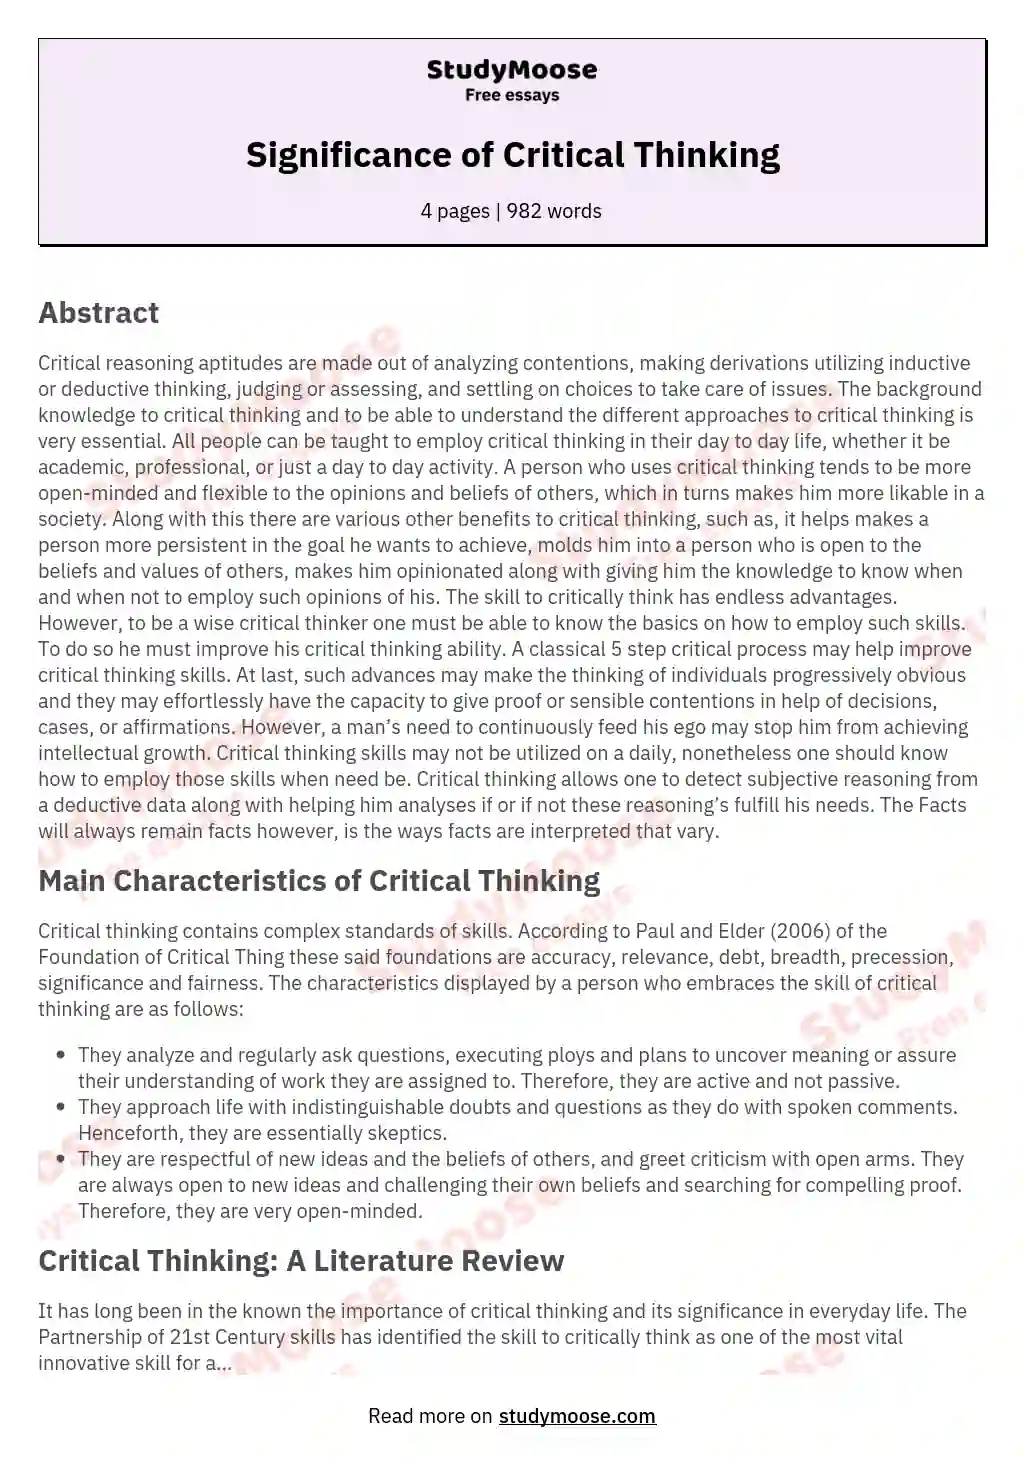 how to start a critical thinking essay